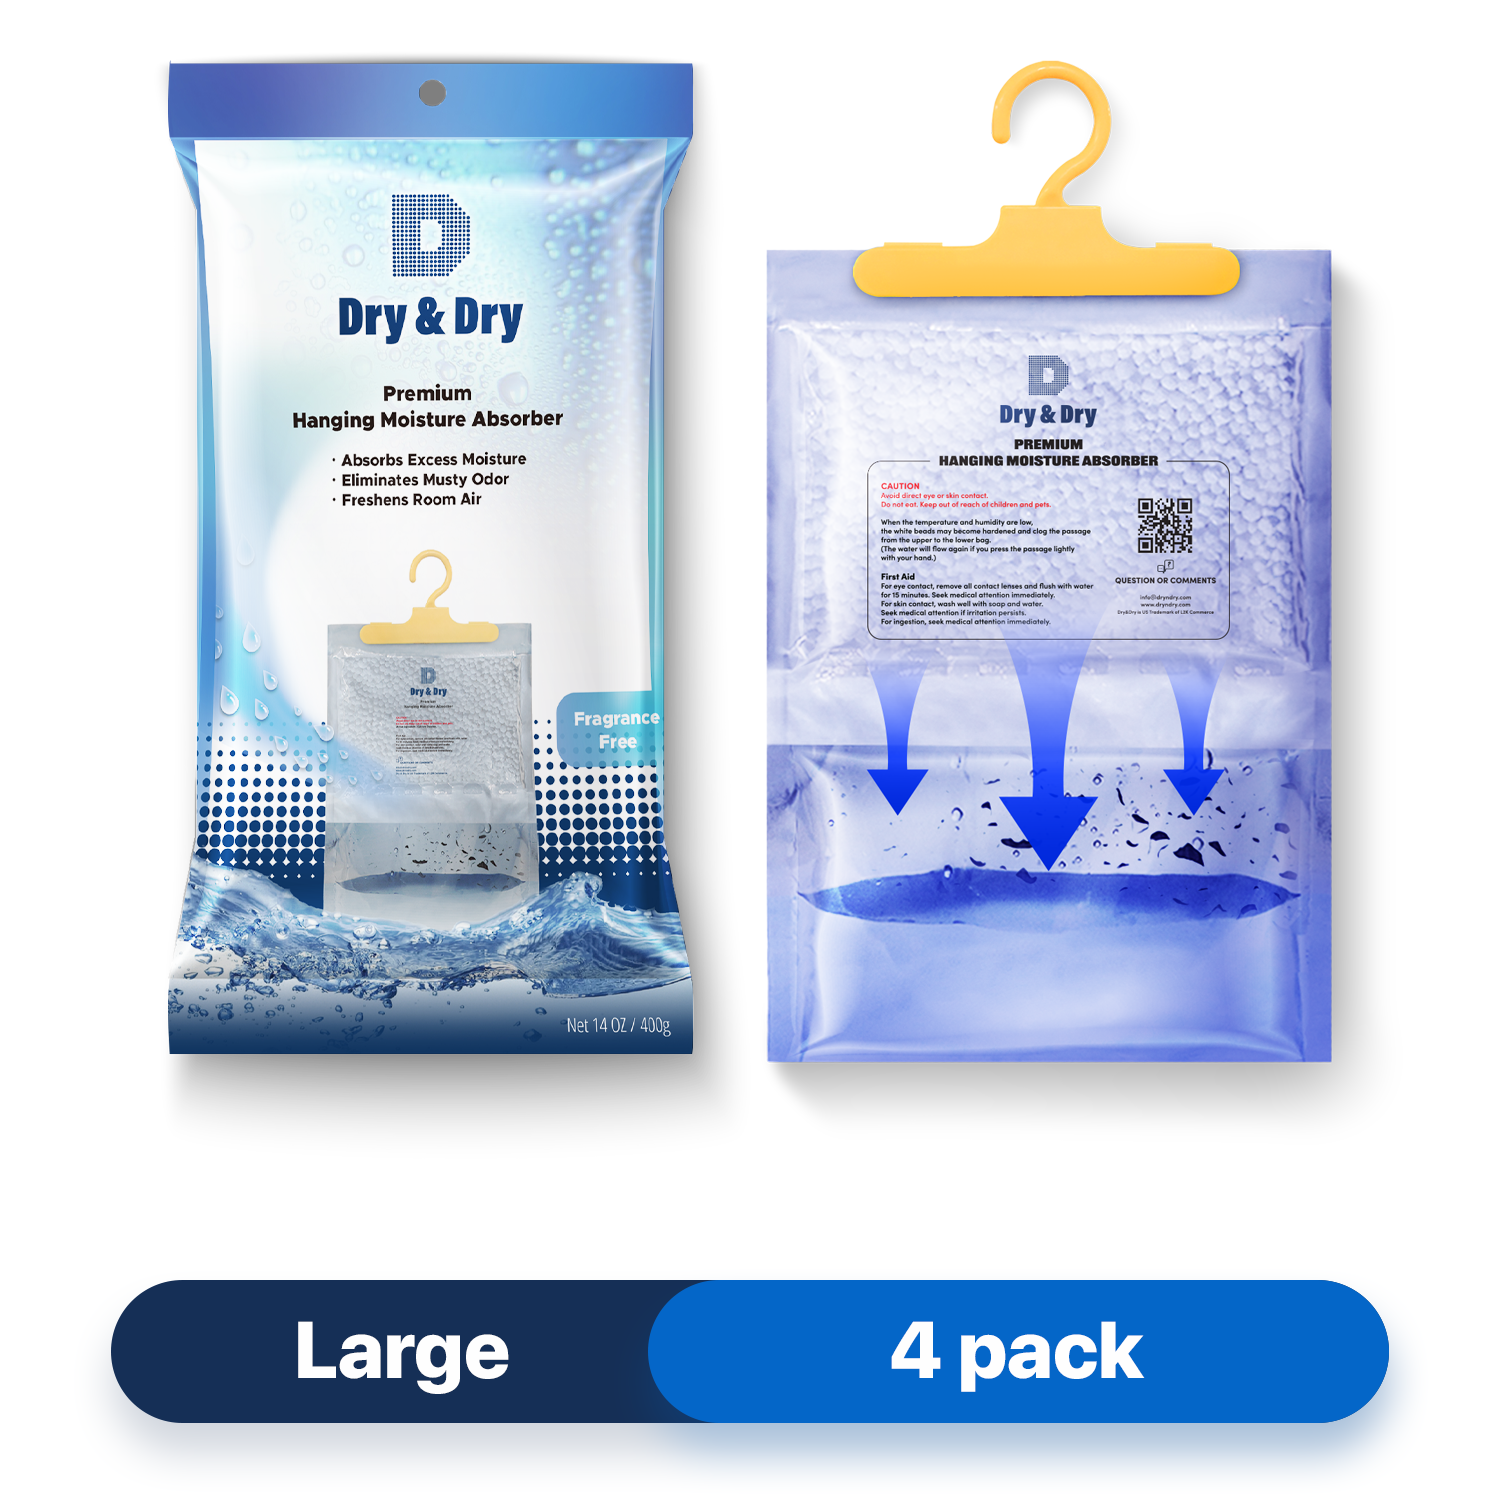 [4 pack] [Net 14 oz/Pack] “Dry & Dry” Premium Hanging Moisture Absorber to Control Excess Moisture for Basements, Bathrooms, Laundry Rooms, and Enclosed Spaces